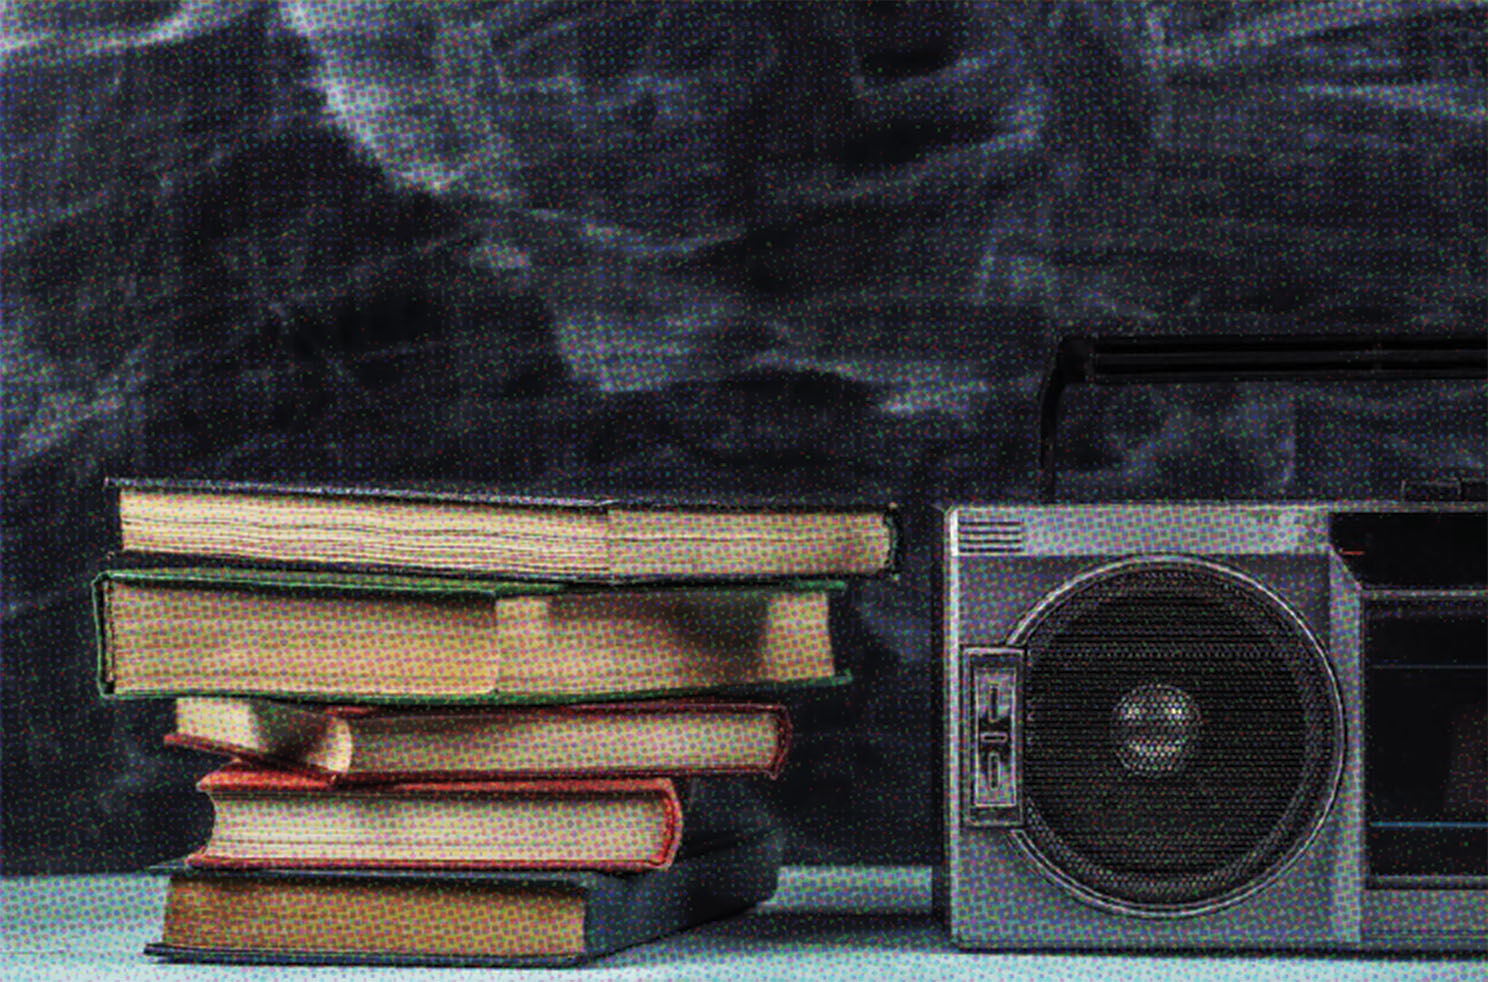 Books and Stereo